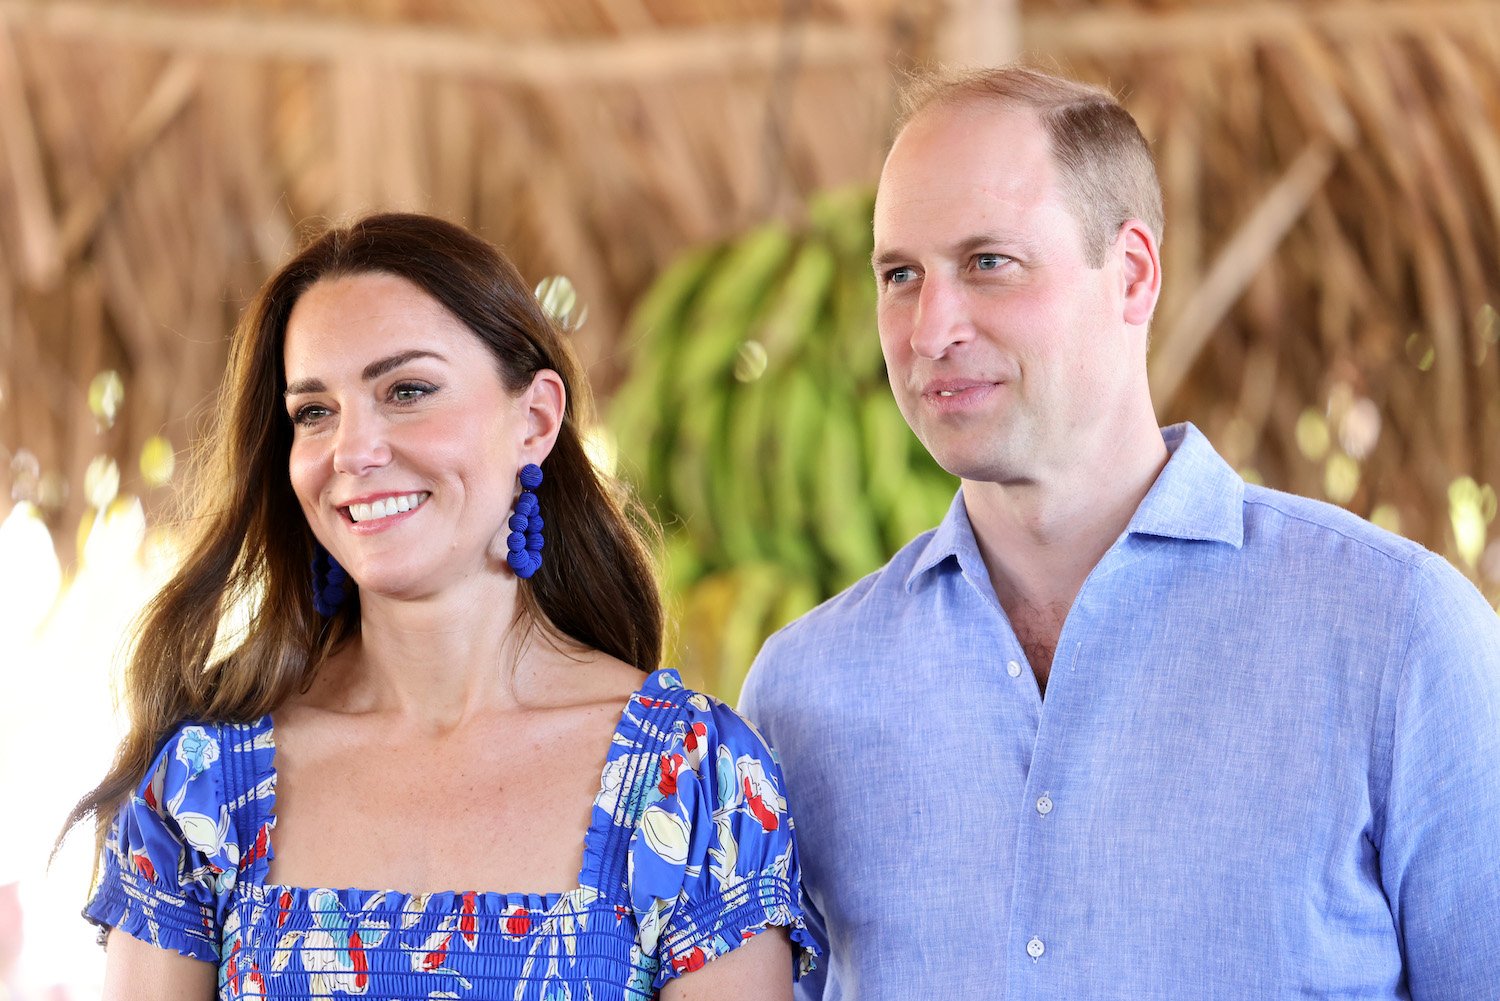 Kate Middleton wears a blue print dress and blue earrings and smiles, Prince William wears a blue button down shirt and smiles while visiting Belize